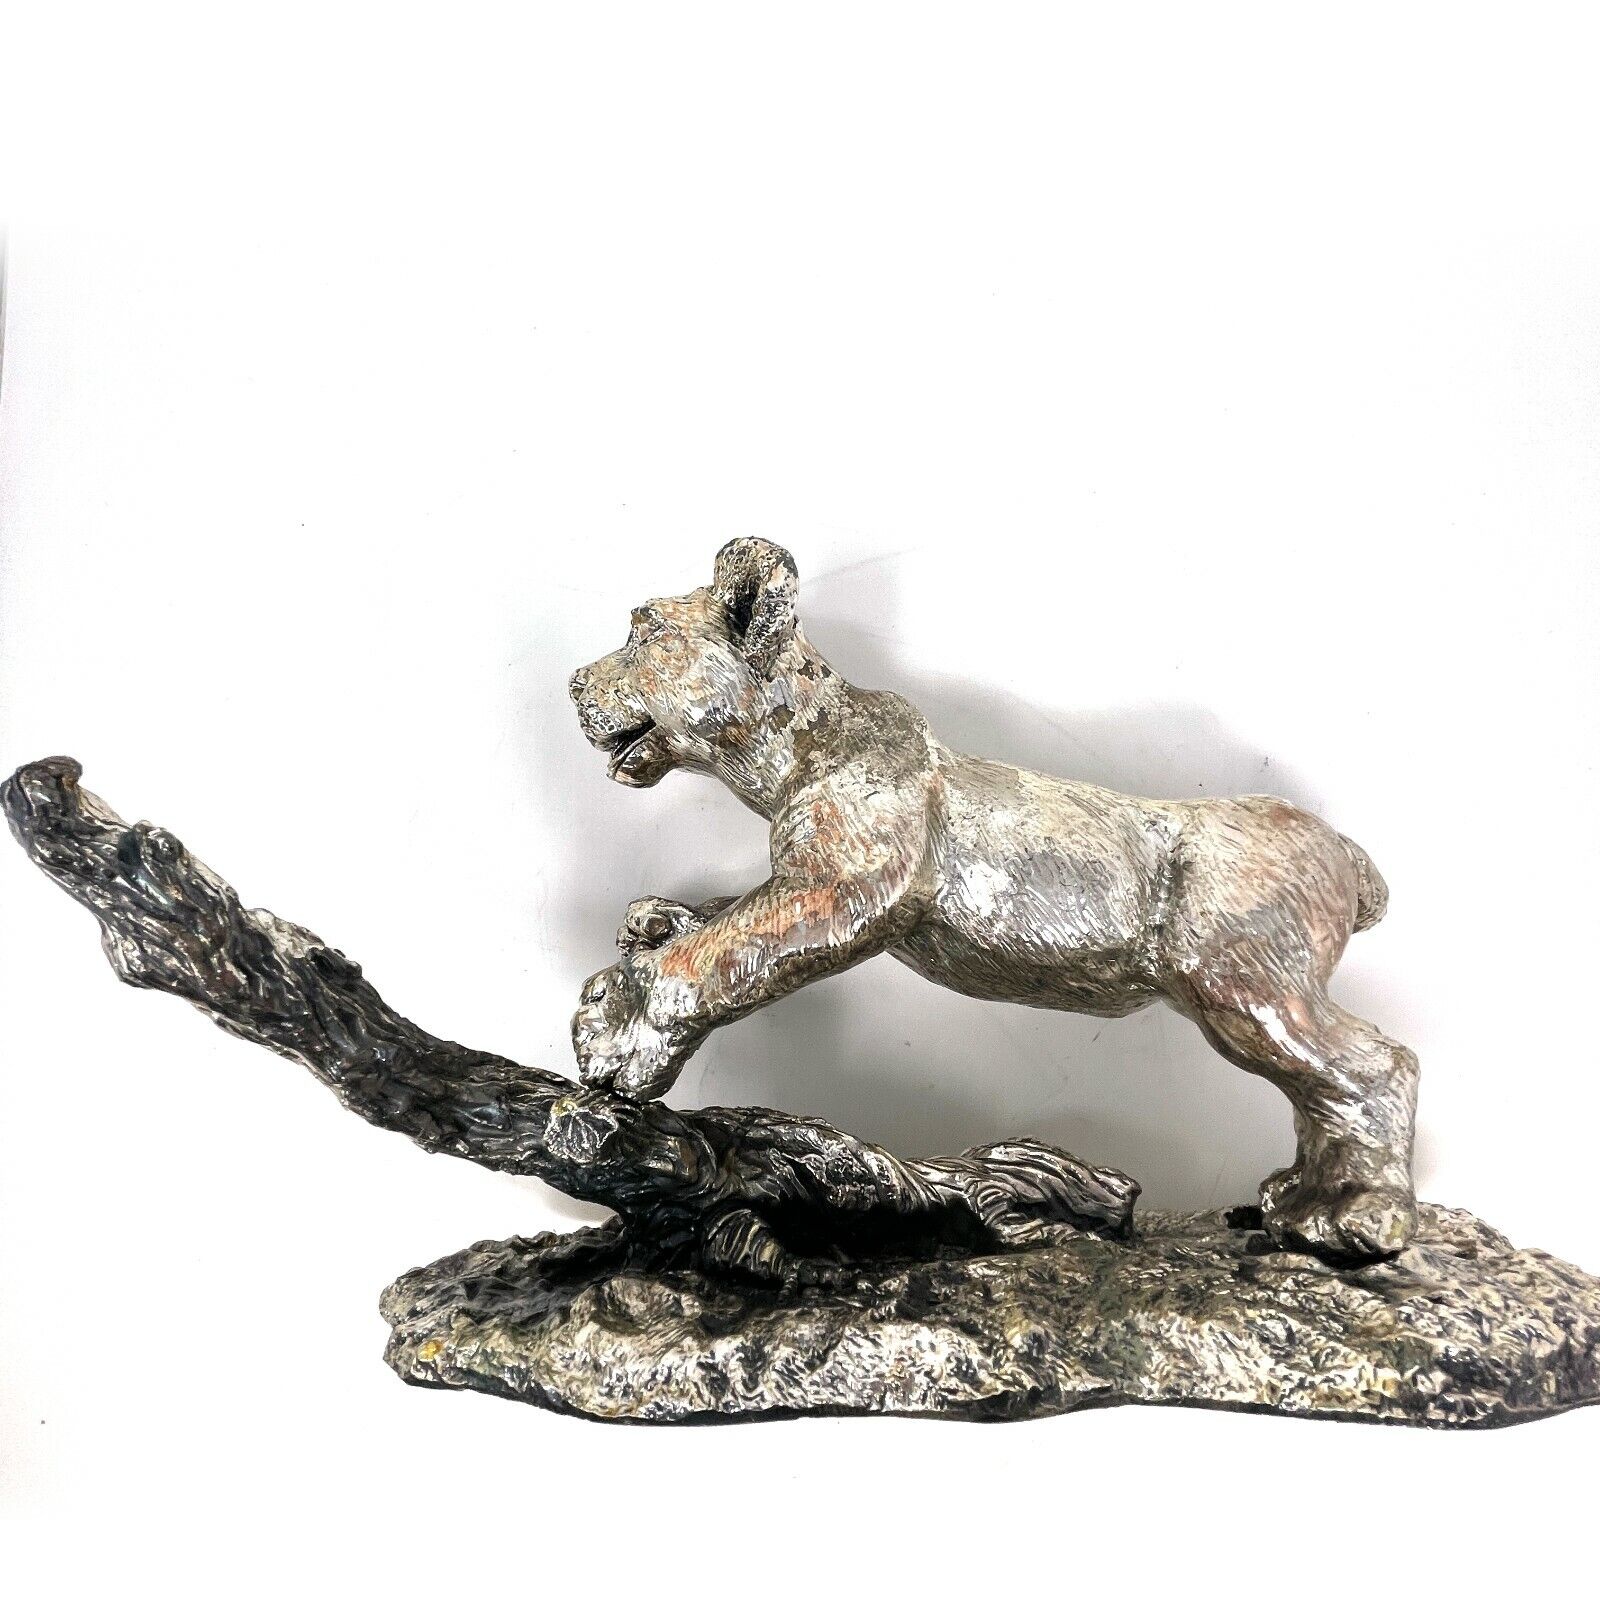 Elegant Lion Cub Sculpture and Figurine 7 in x 20 in WxL, Decorative Collectible